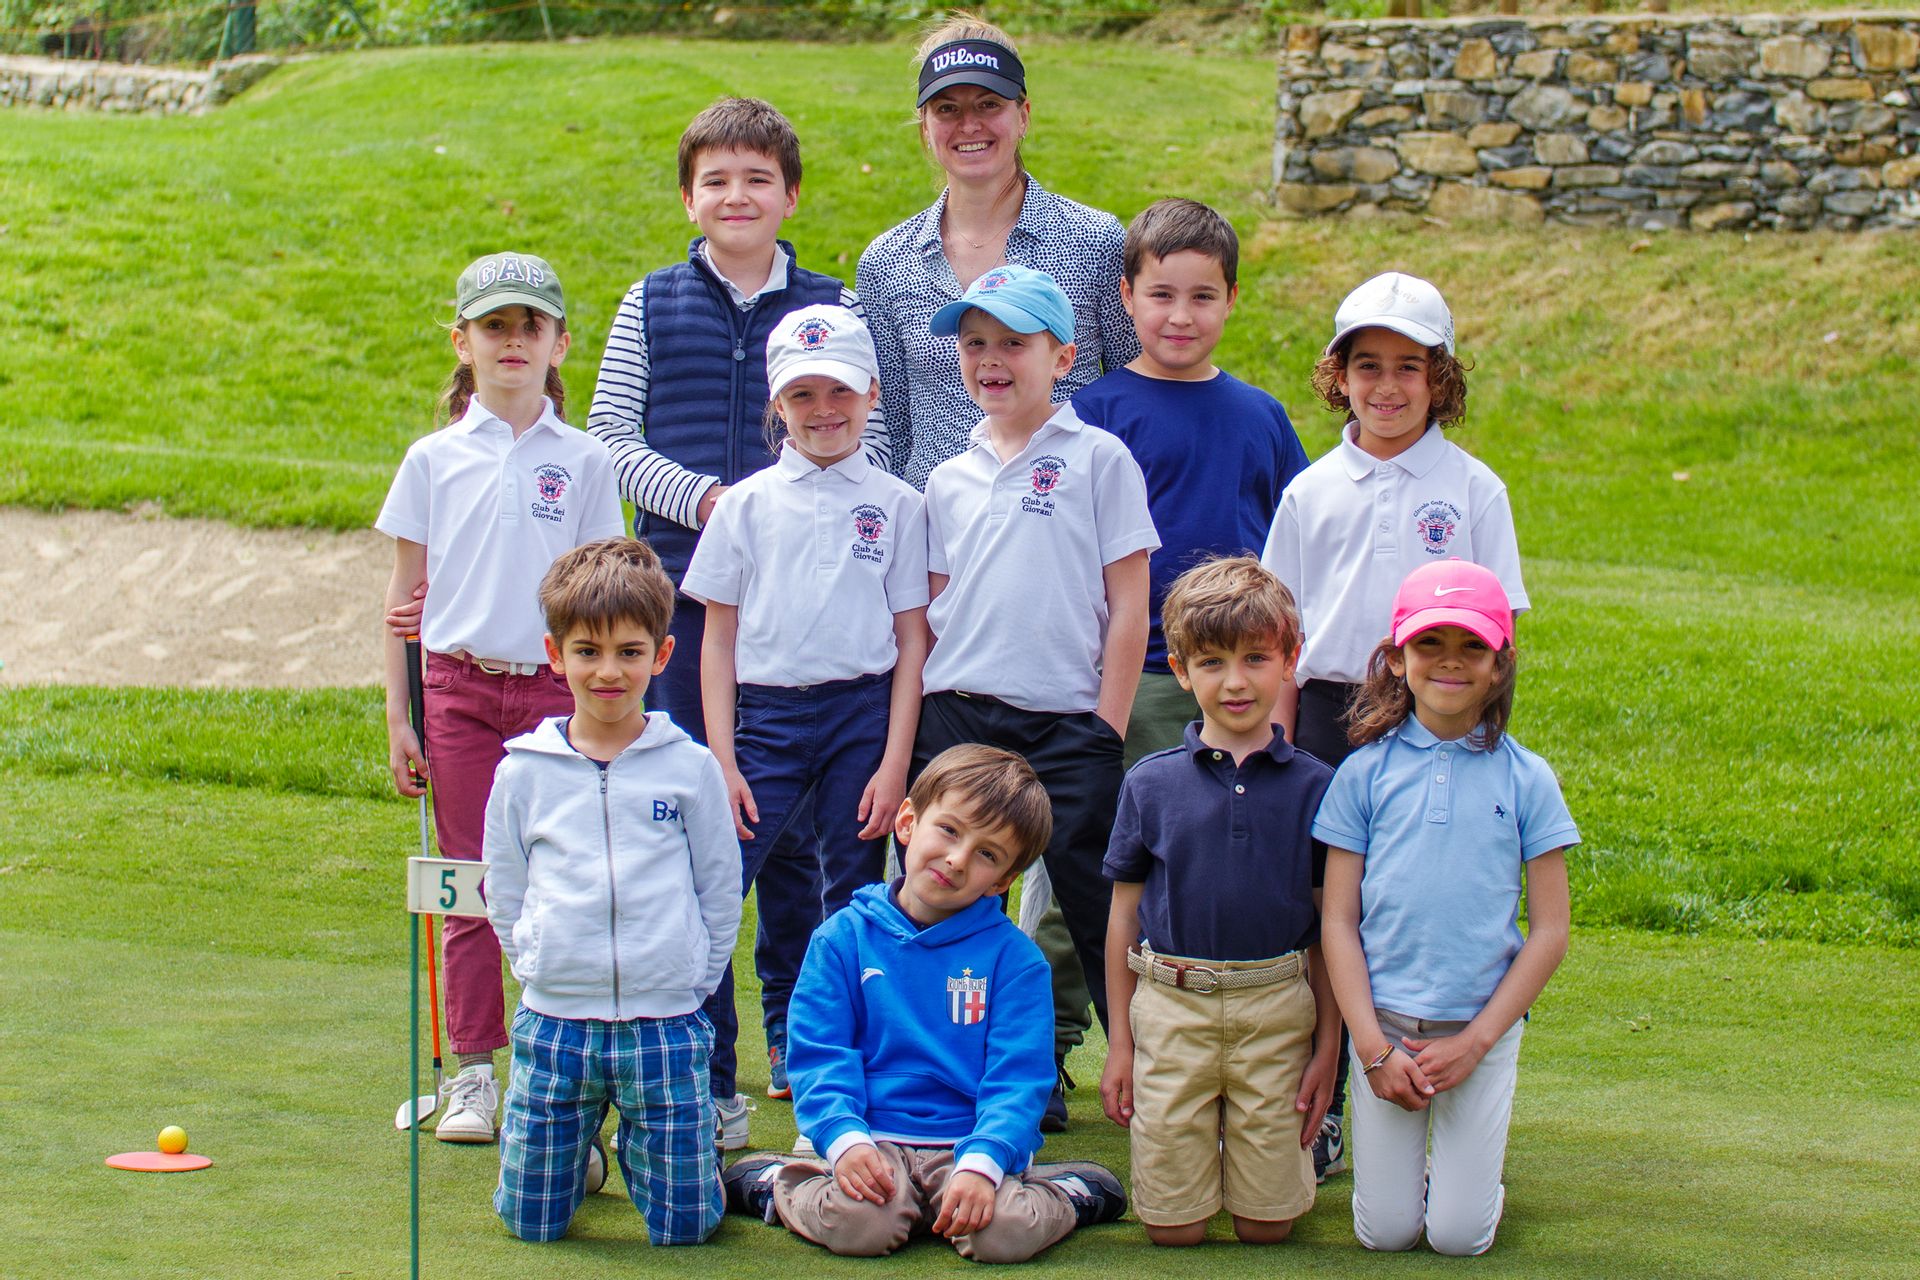 The Rapallo Golf and Tennis Club Young Golfers School